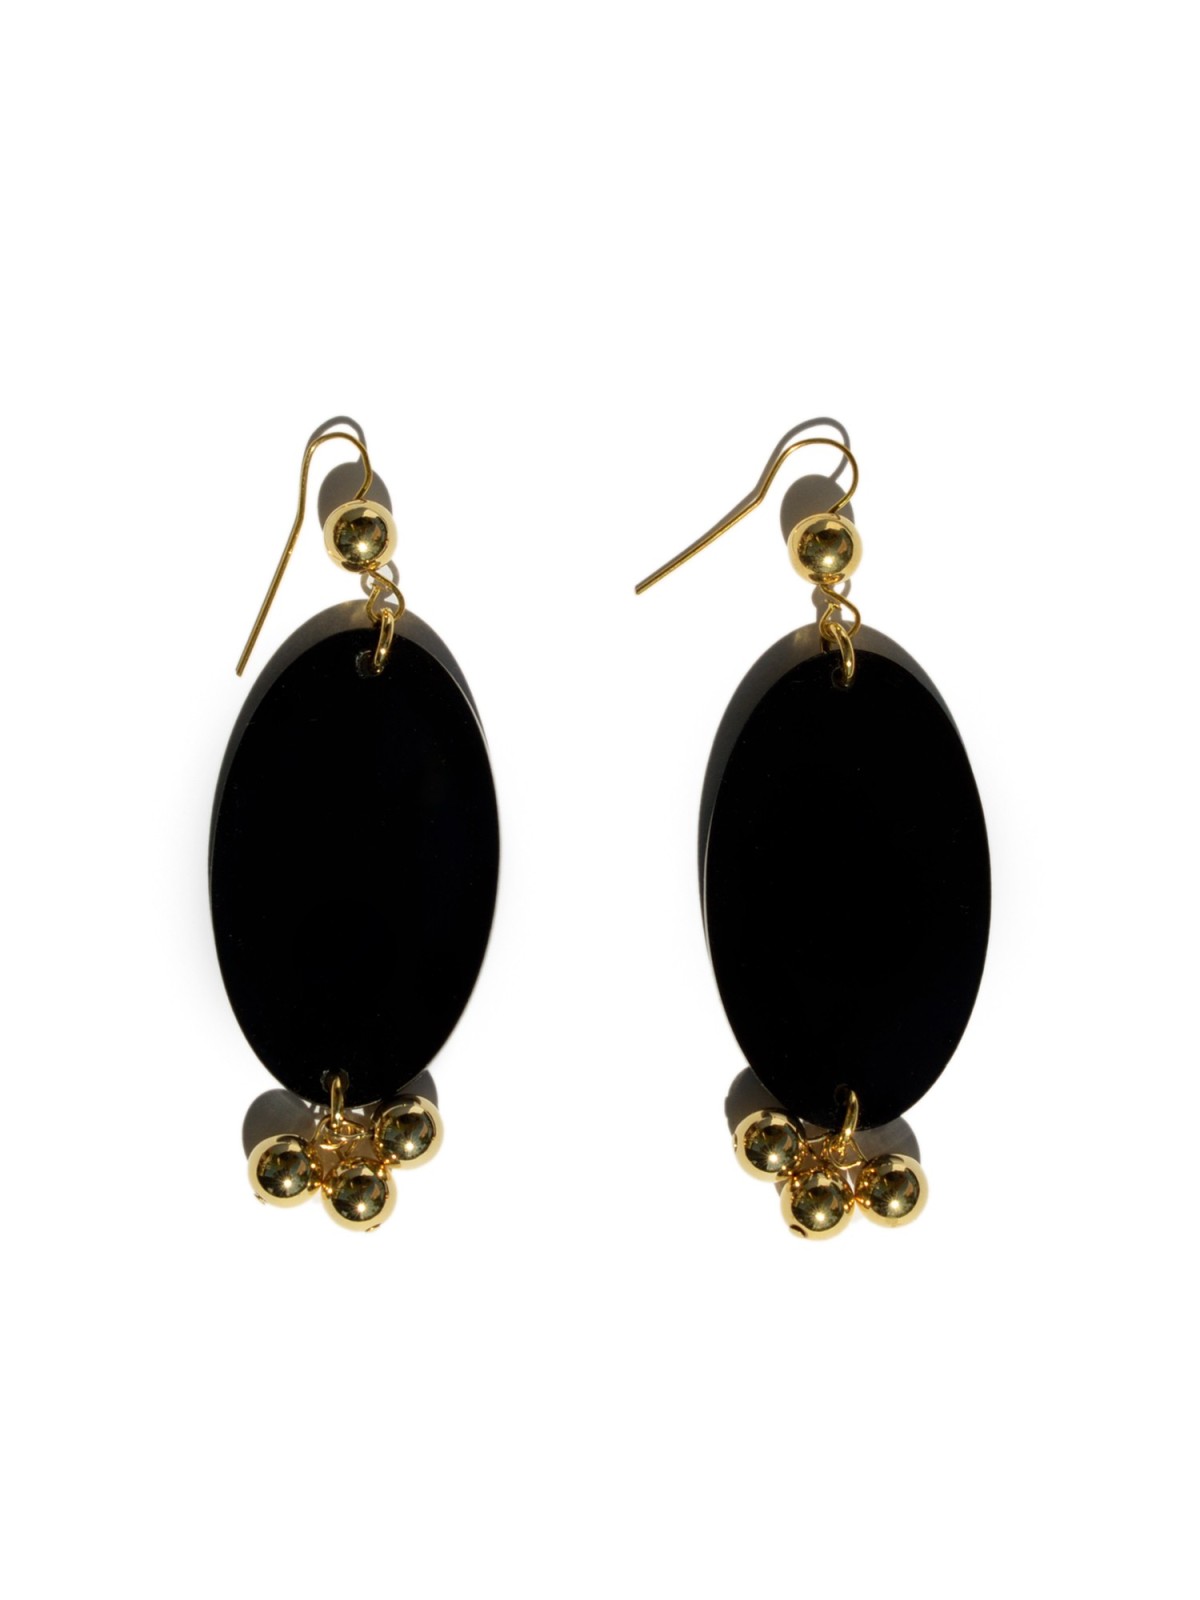 Earrings with black plexiglass oval and gold-plated brass rings and balls.